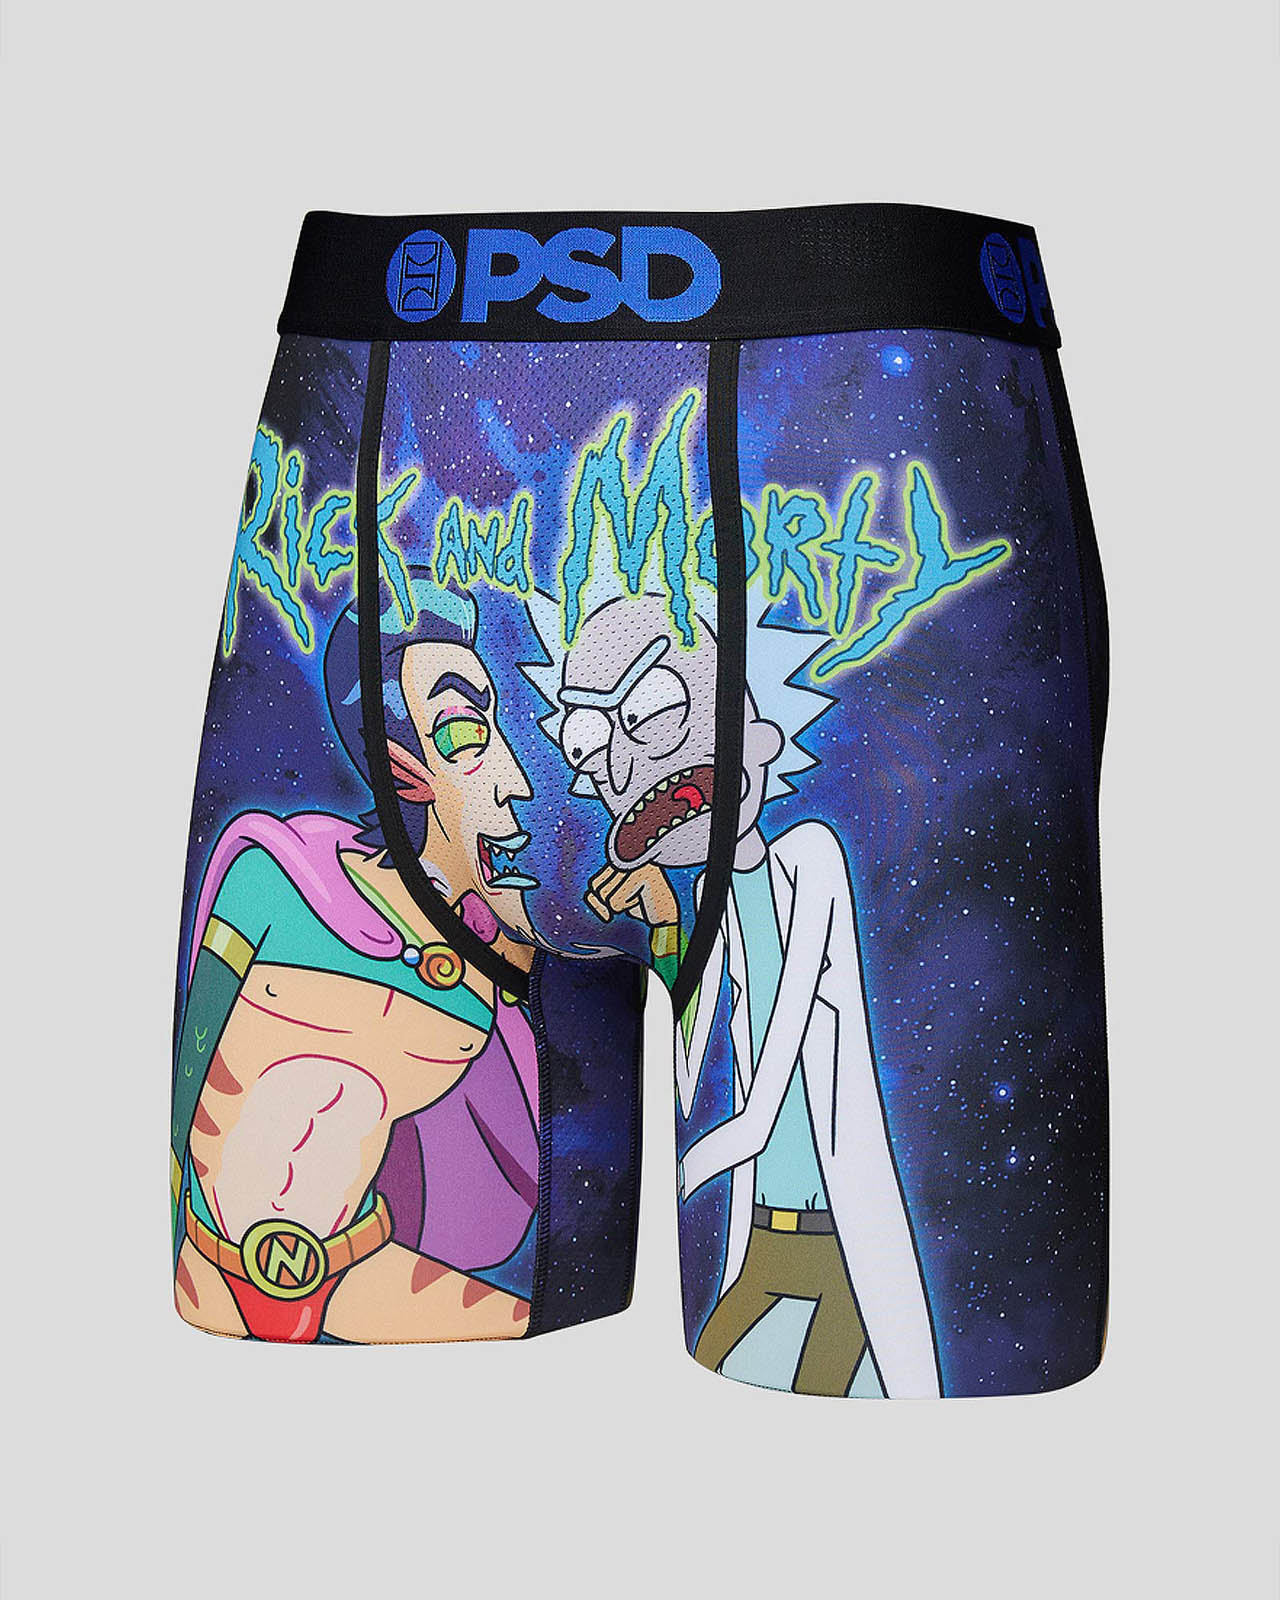 PSD Underwear on X: New Rick & Morty styles just landed 🔥 https